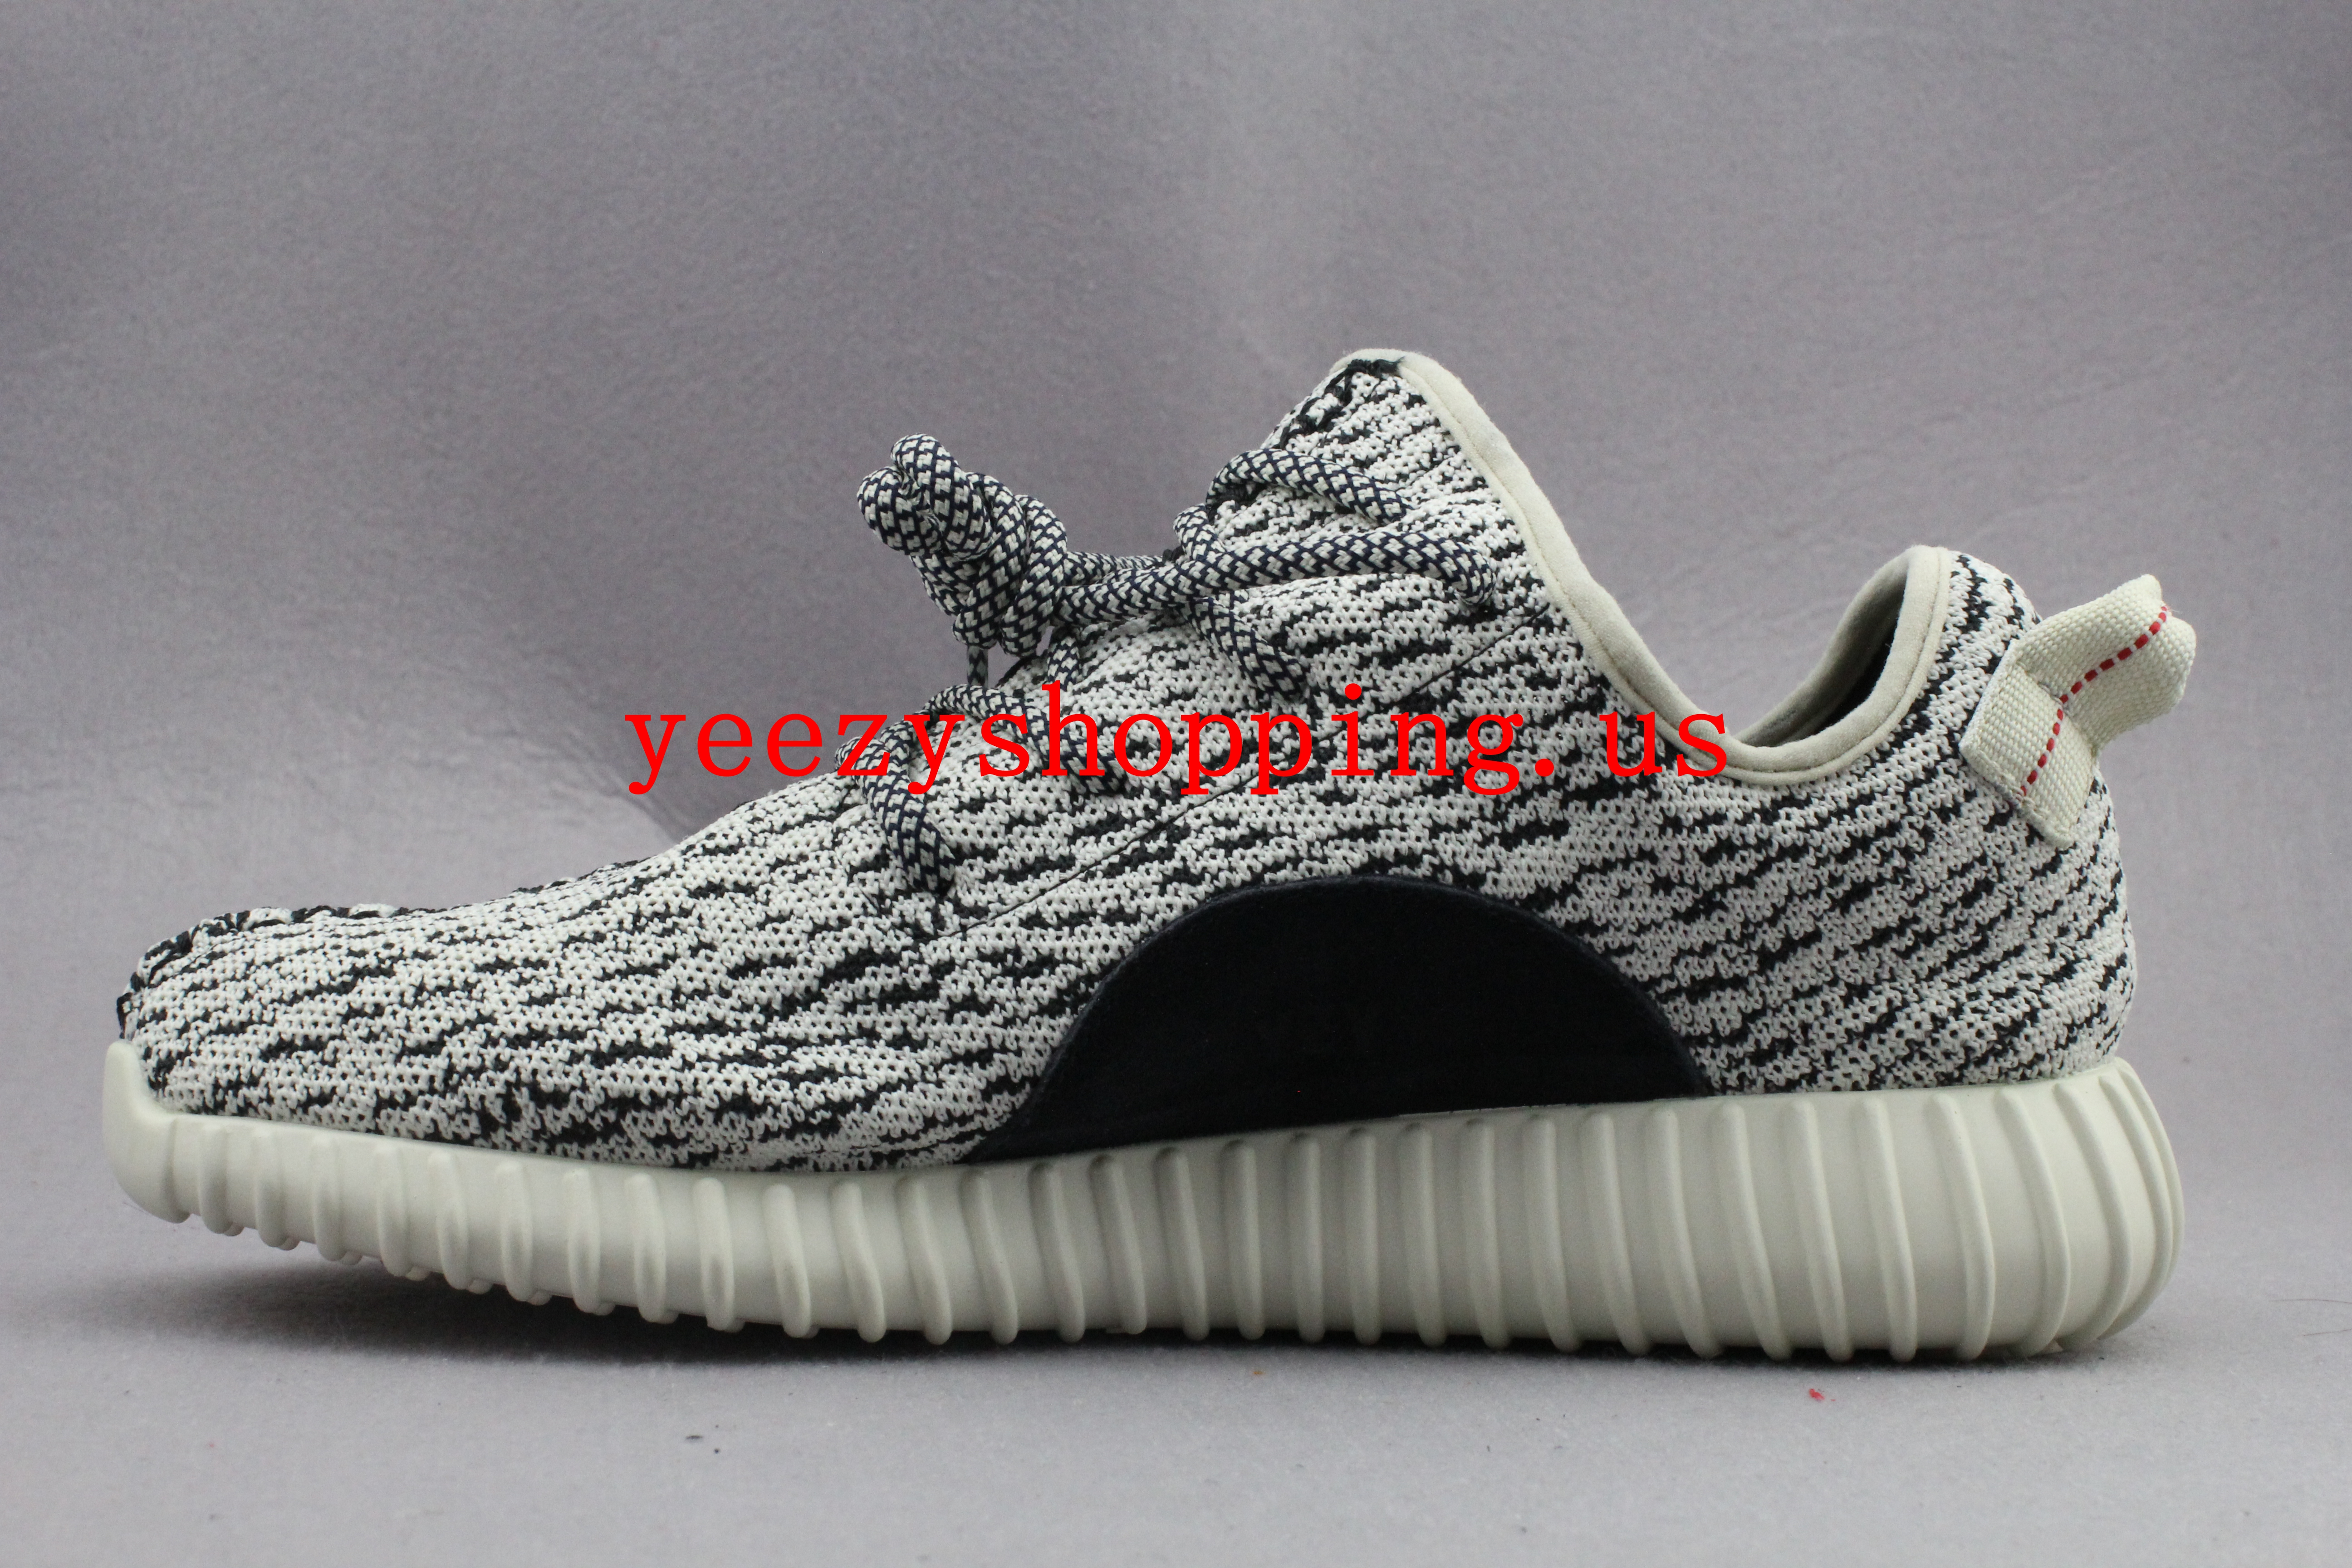 dhgate shoes yeezy